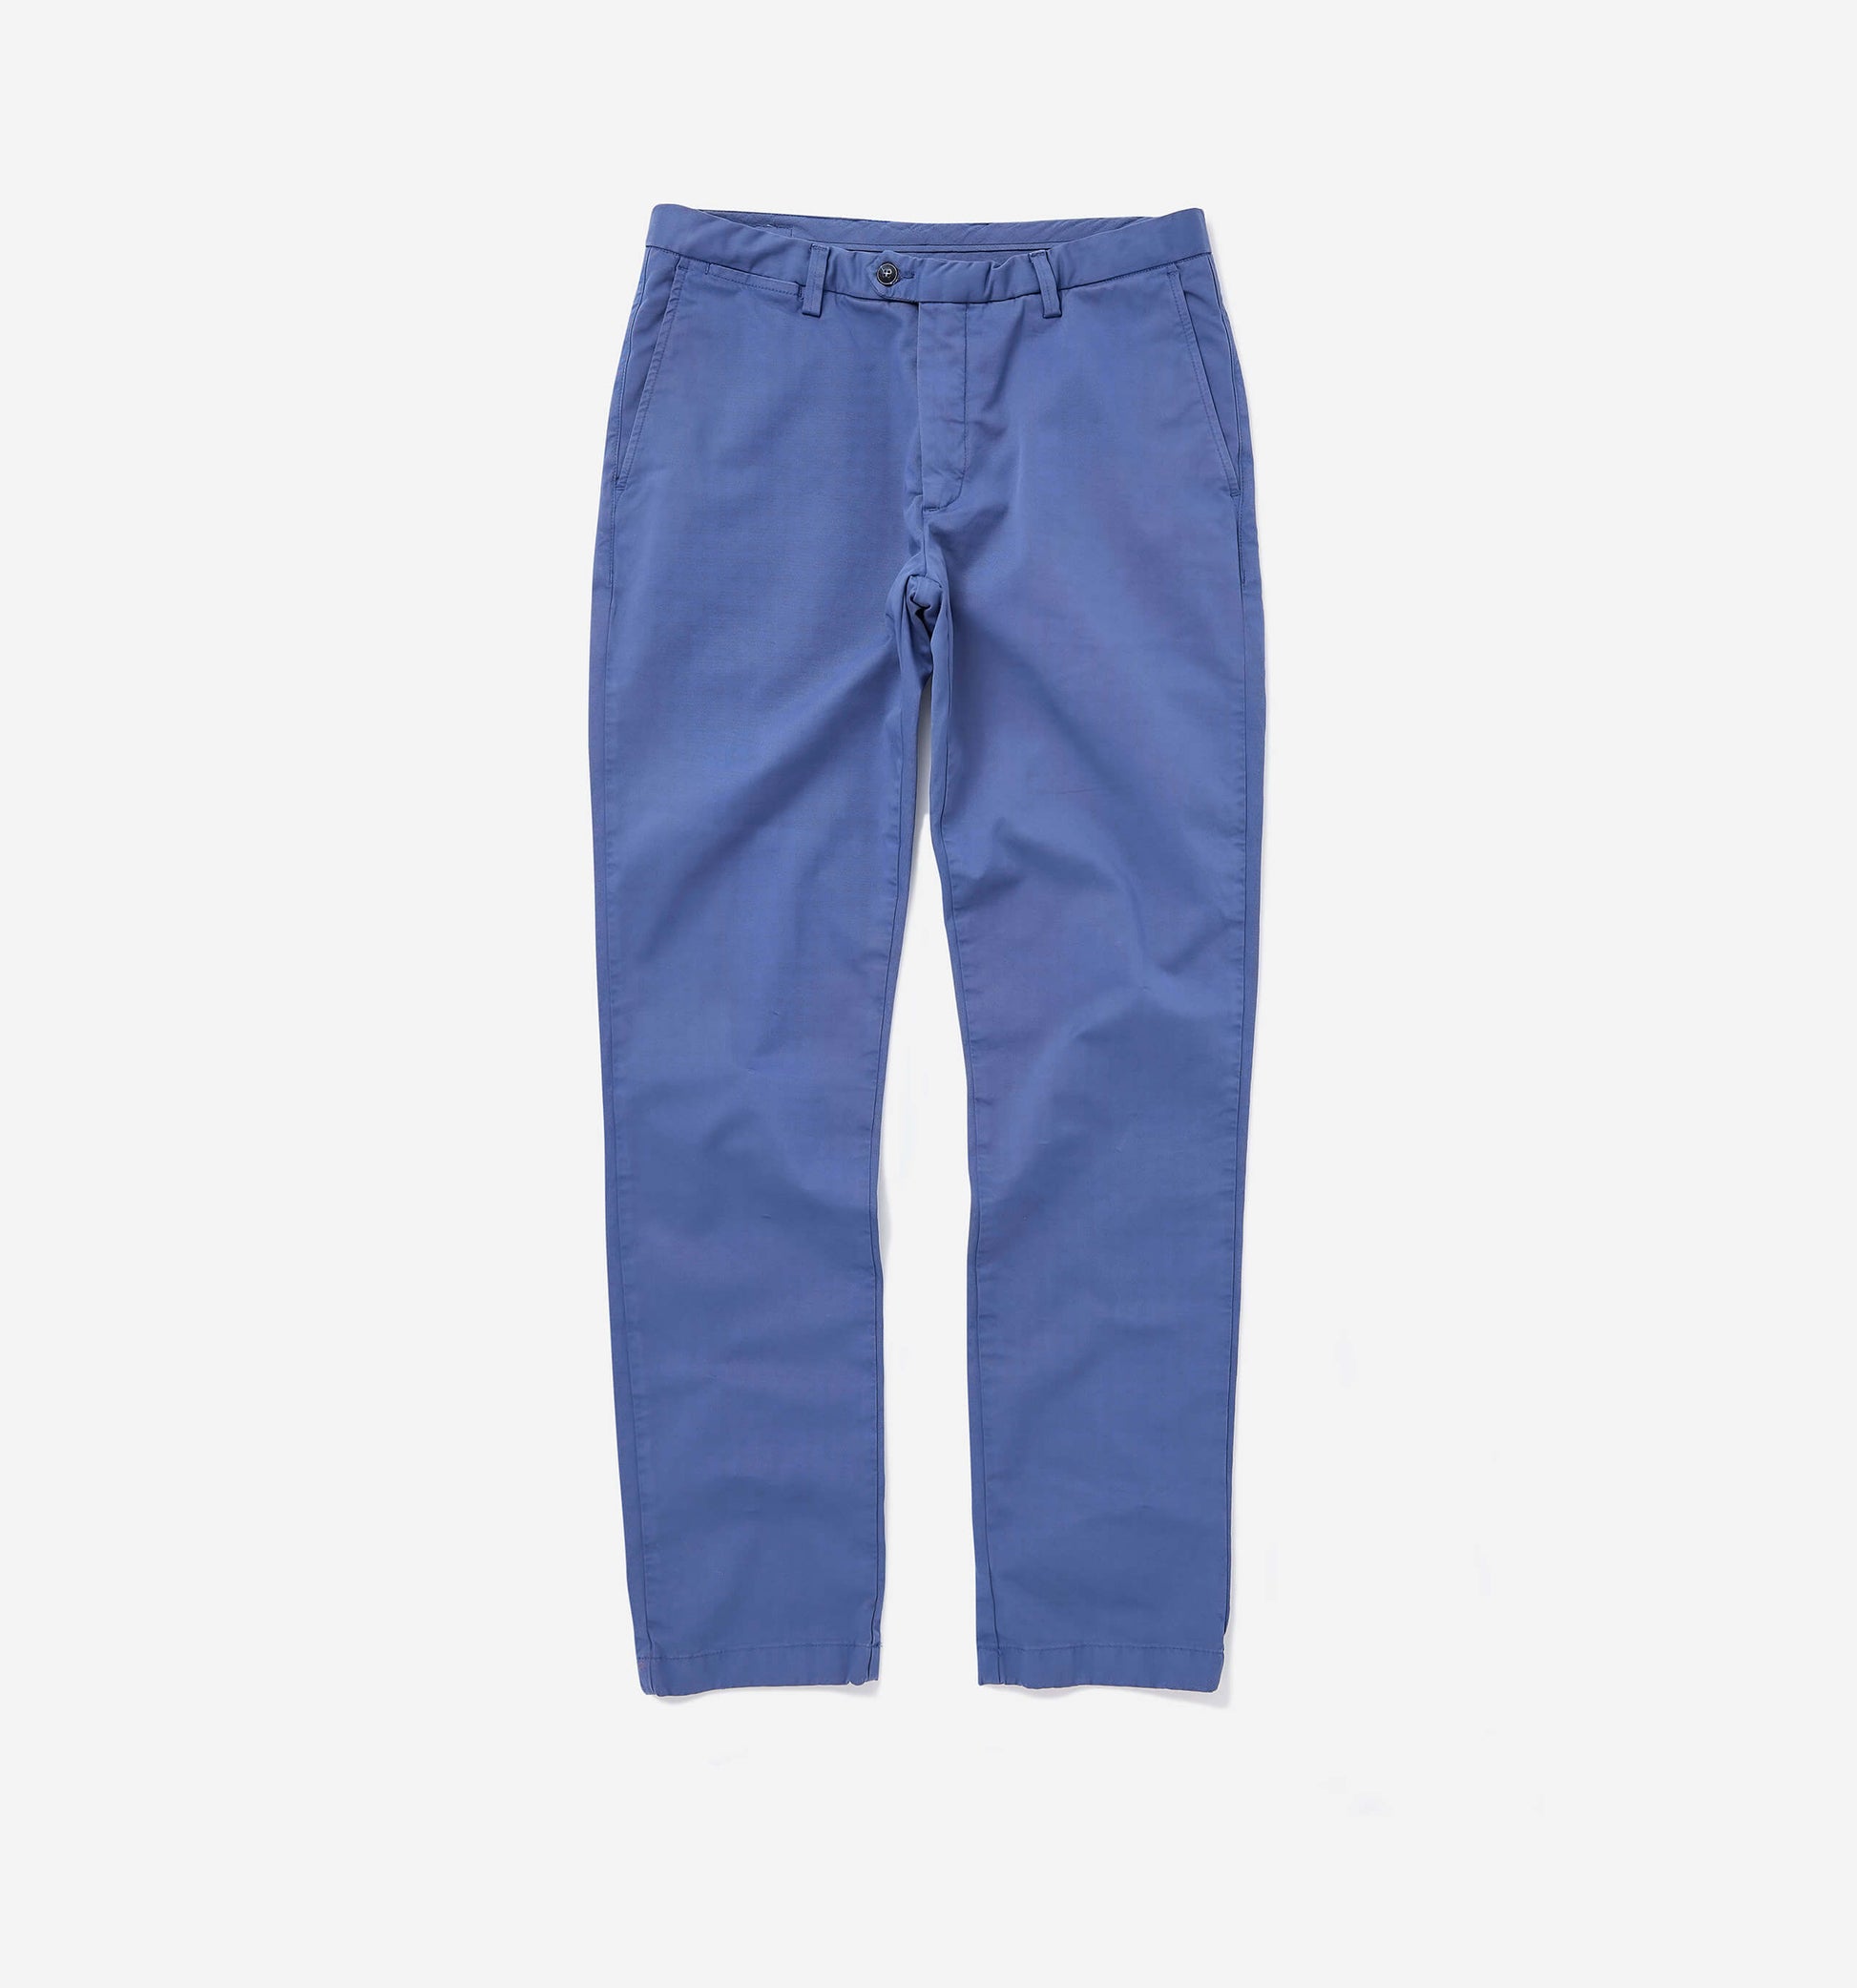 The Harry - Cotton-Stretch Chino In Blue From King Essentials